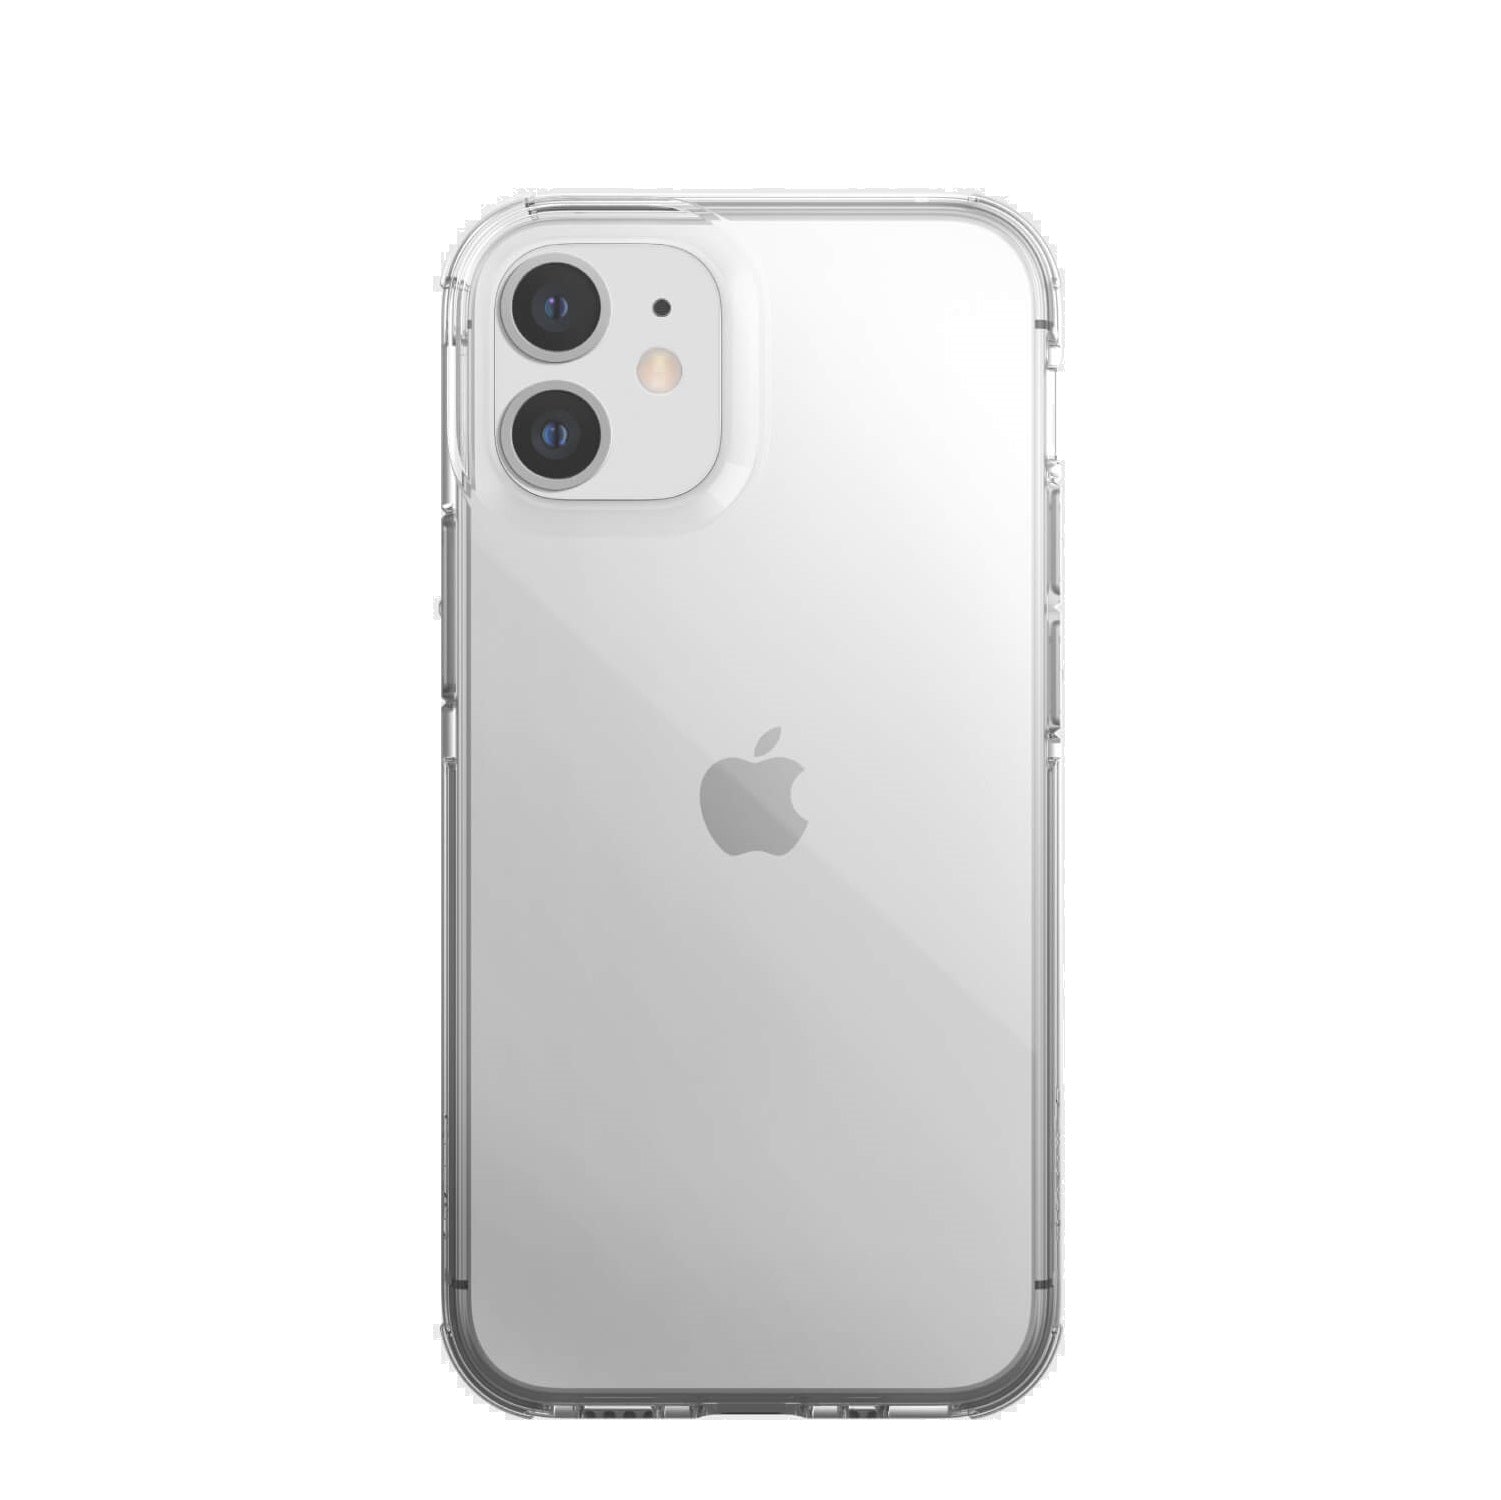 https://caserace.net/products/x-doria-defense-clear-back-cover-for-iphone-iphone-12-mini-5-4-clear